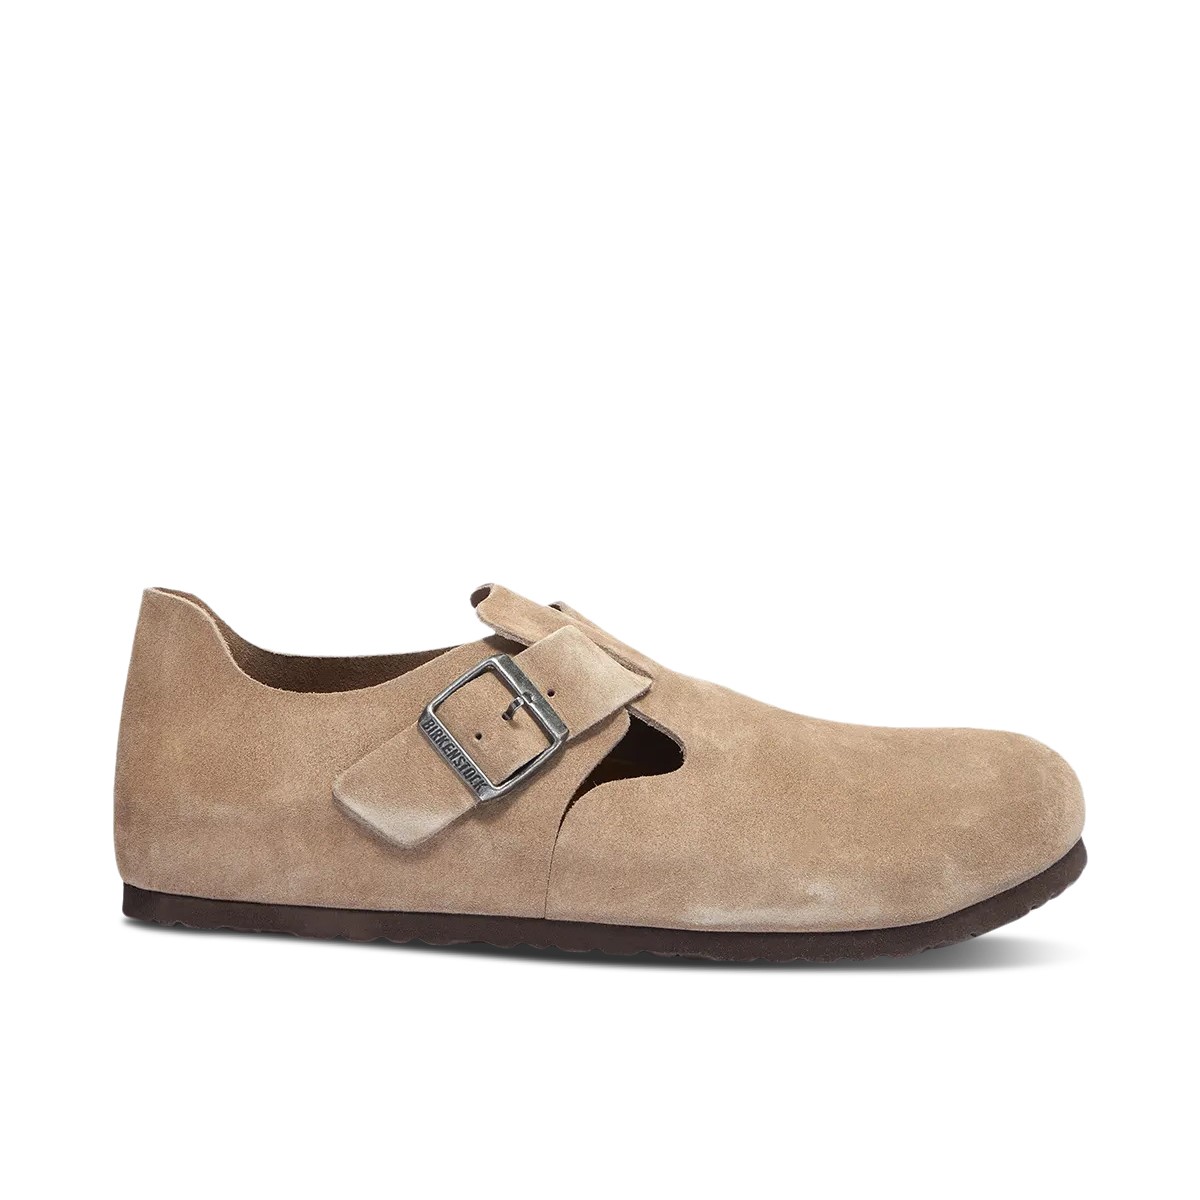 Women's London Clogs in Taupe